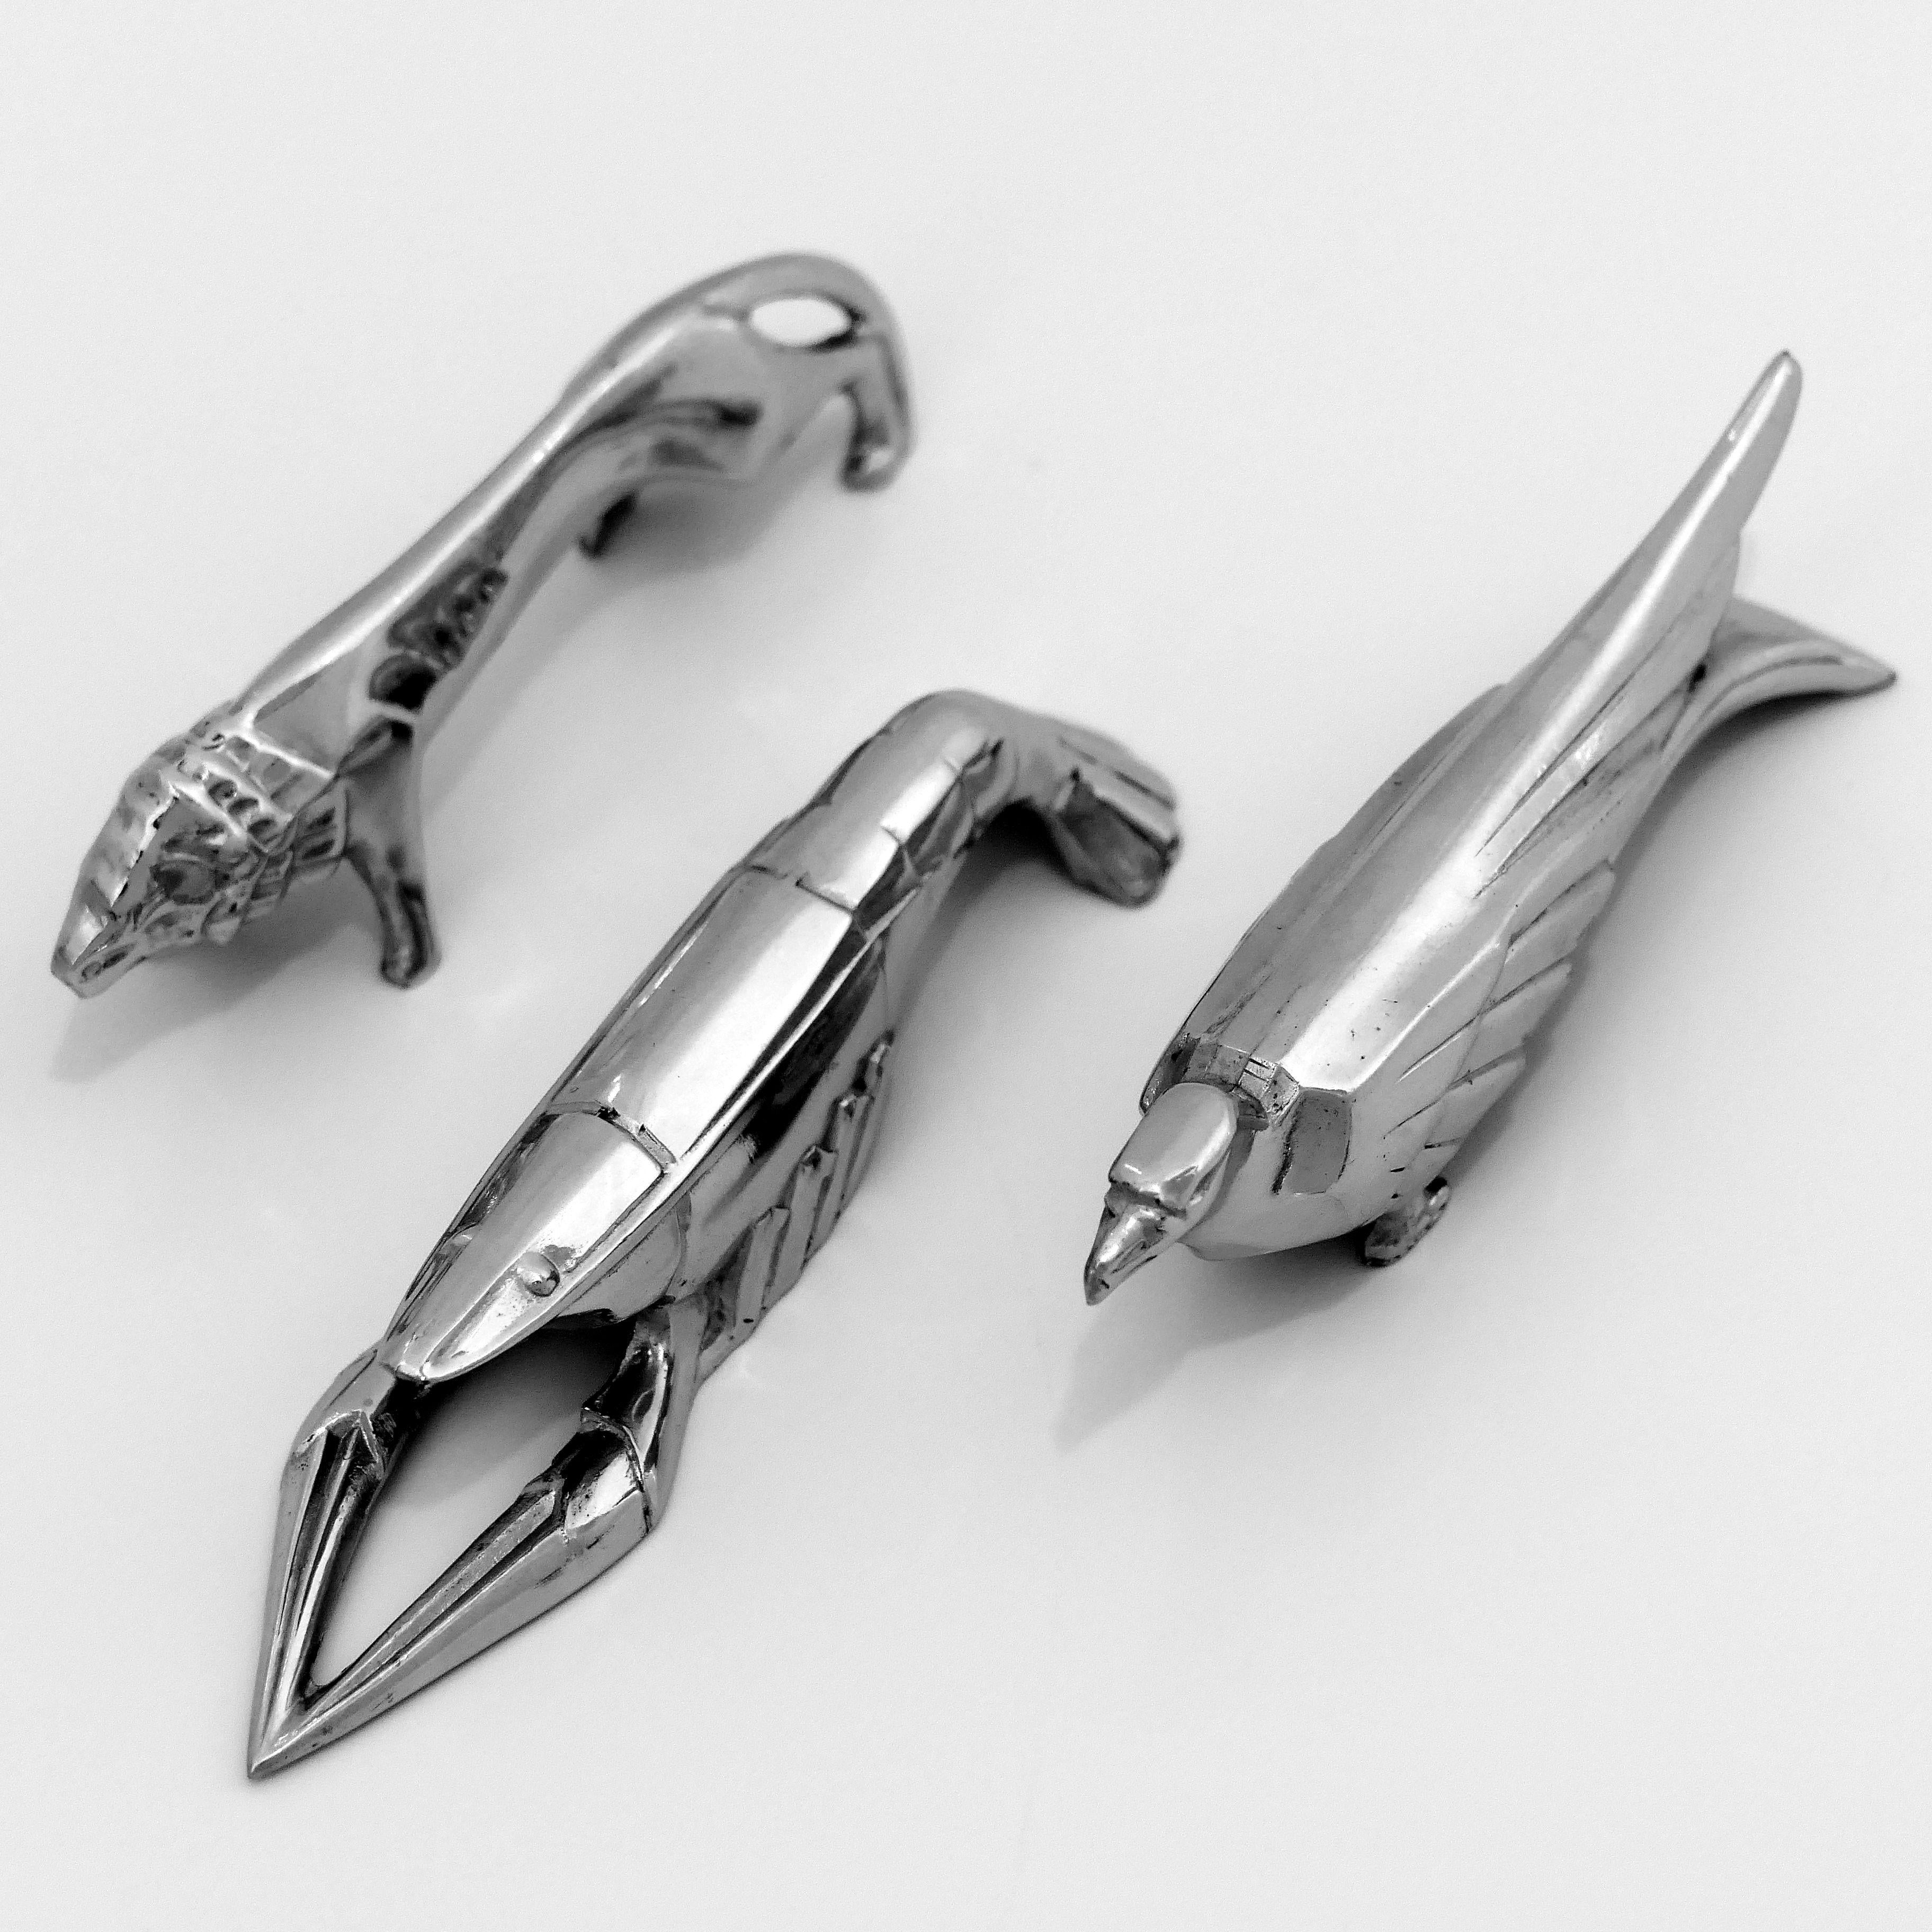 Rare set of ten chrome-plated metal knife-rests in the shape of different animals: lobster, lion, grasshopper, cock, monkey, eagle, fish, sea lion, puma and duck, circa 1920-1930. 

The knife rests feature the characteristic of the Art Deco style